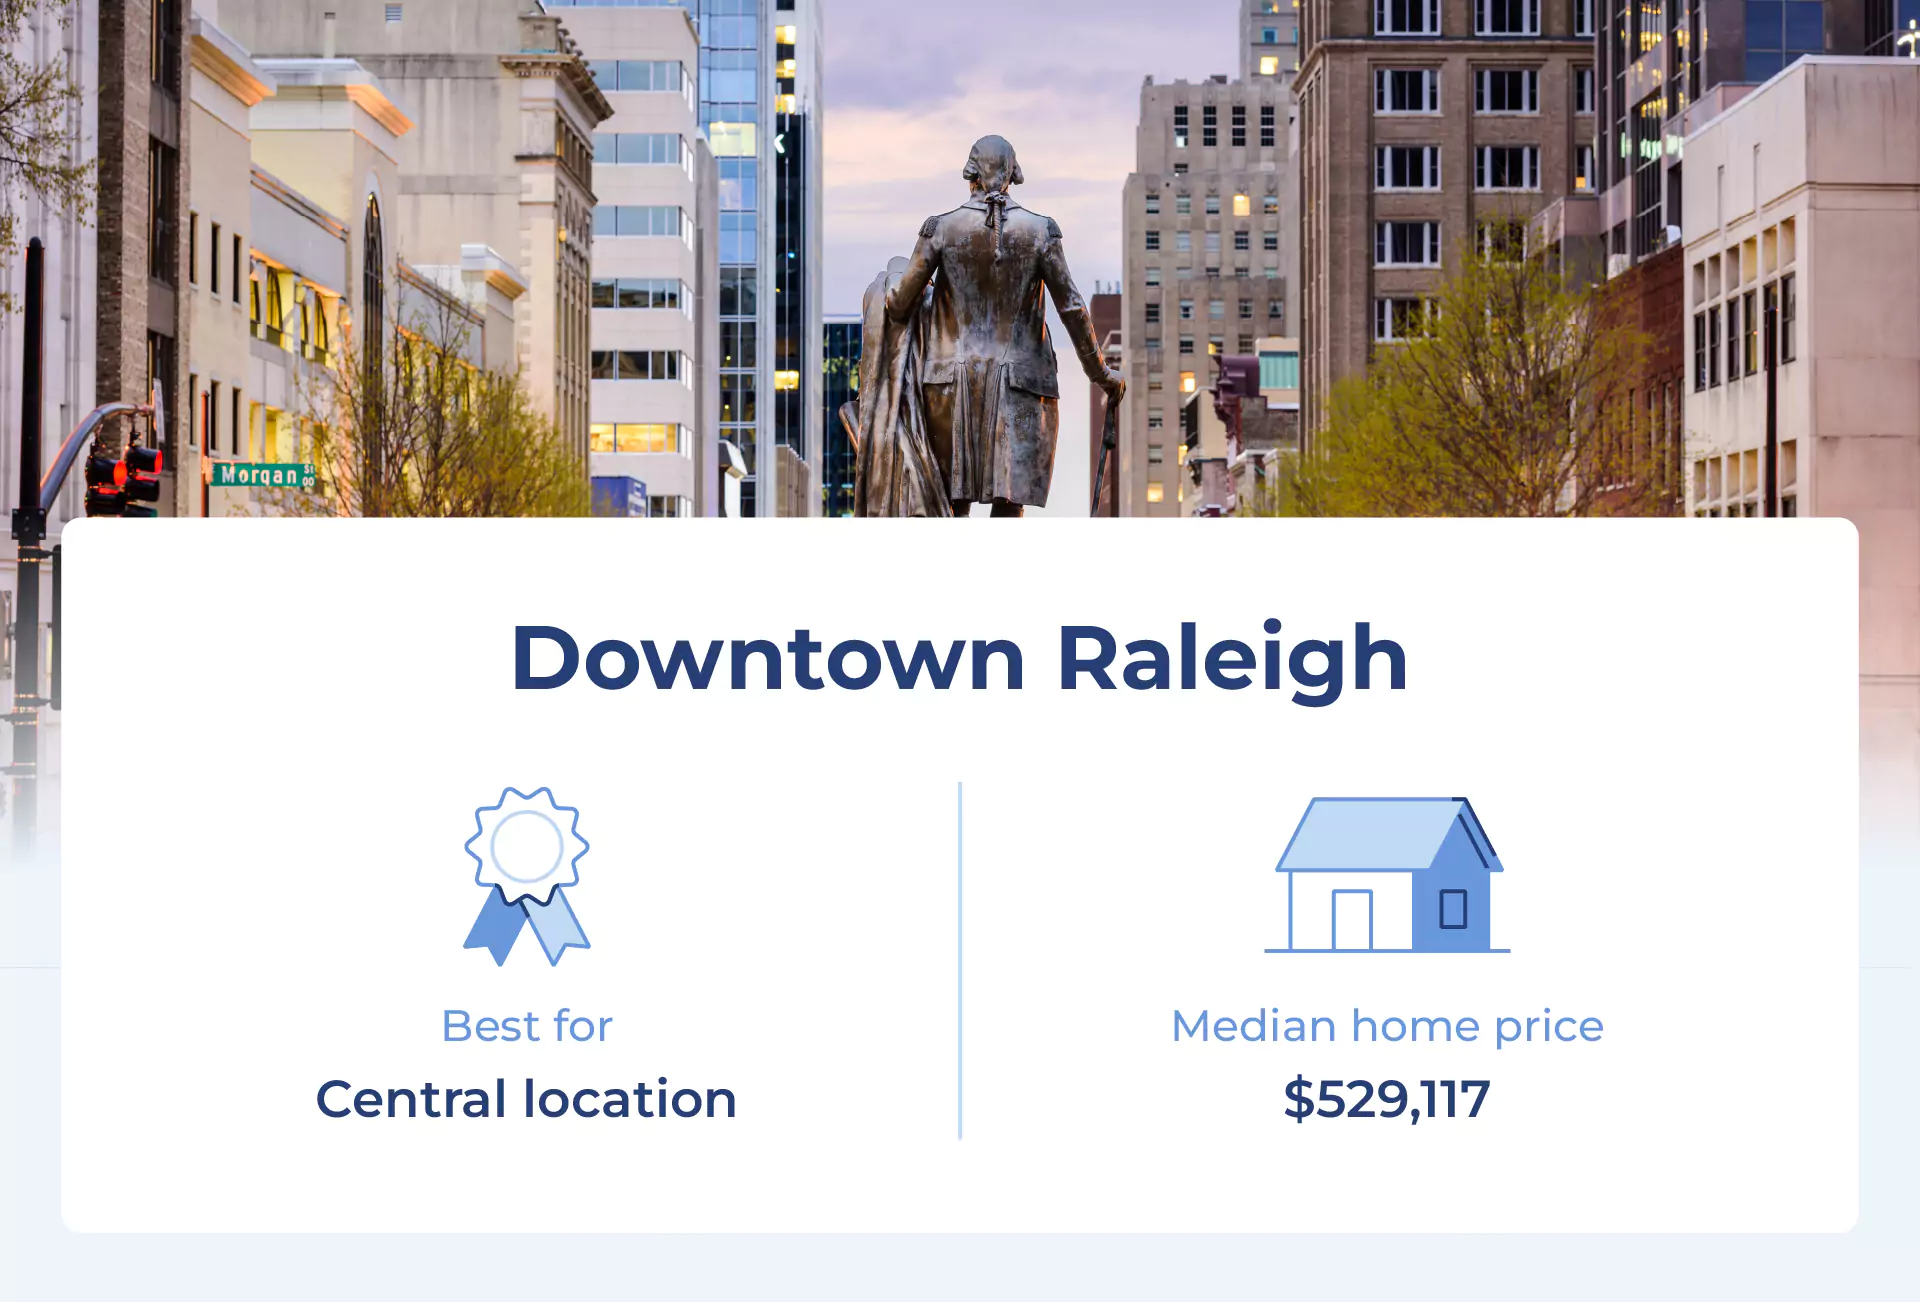 Image shows the median price for one of the best neighborhoods in Raleigh, Downtown Raleigh.